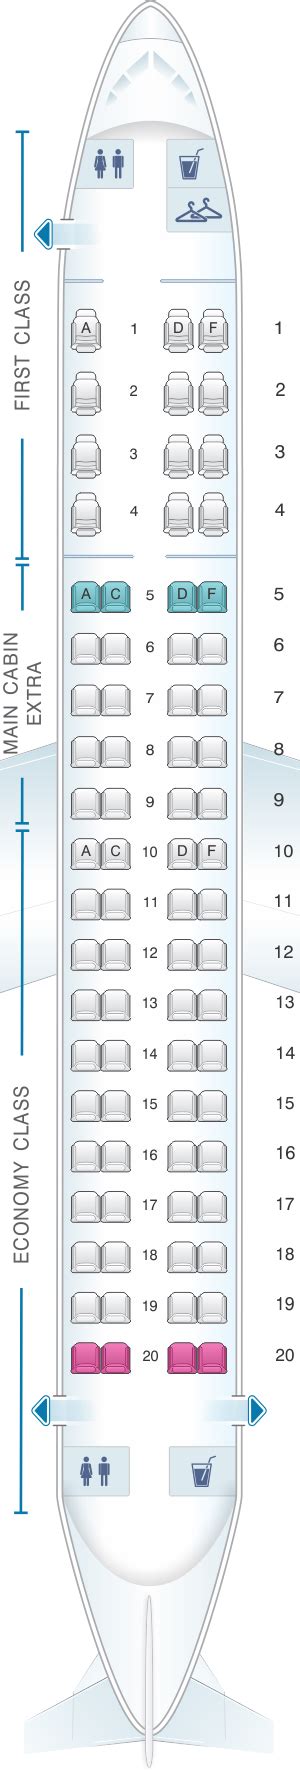 Embraer 175 american seat map. For your next American Airlines flight, use this seating chart to get the most comfortable seats, legroom, ... American Airlines Seat Maps. Overview; Planes & Seat Maps. Airbus A319 (319) Airbus A320 (320) ... Embraer ERJ-175 (E75) Layout 1; Embraer ERJ-175 (E75) Layout 2; Check-in; Baggage; ... 